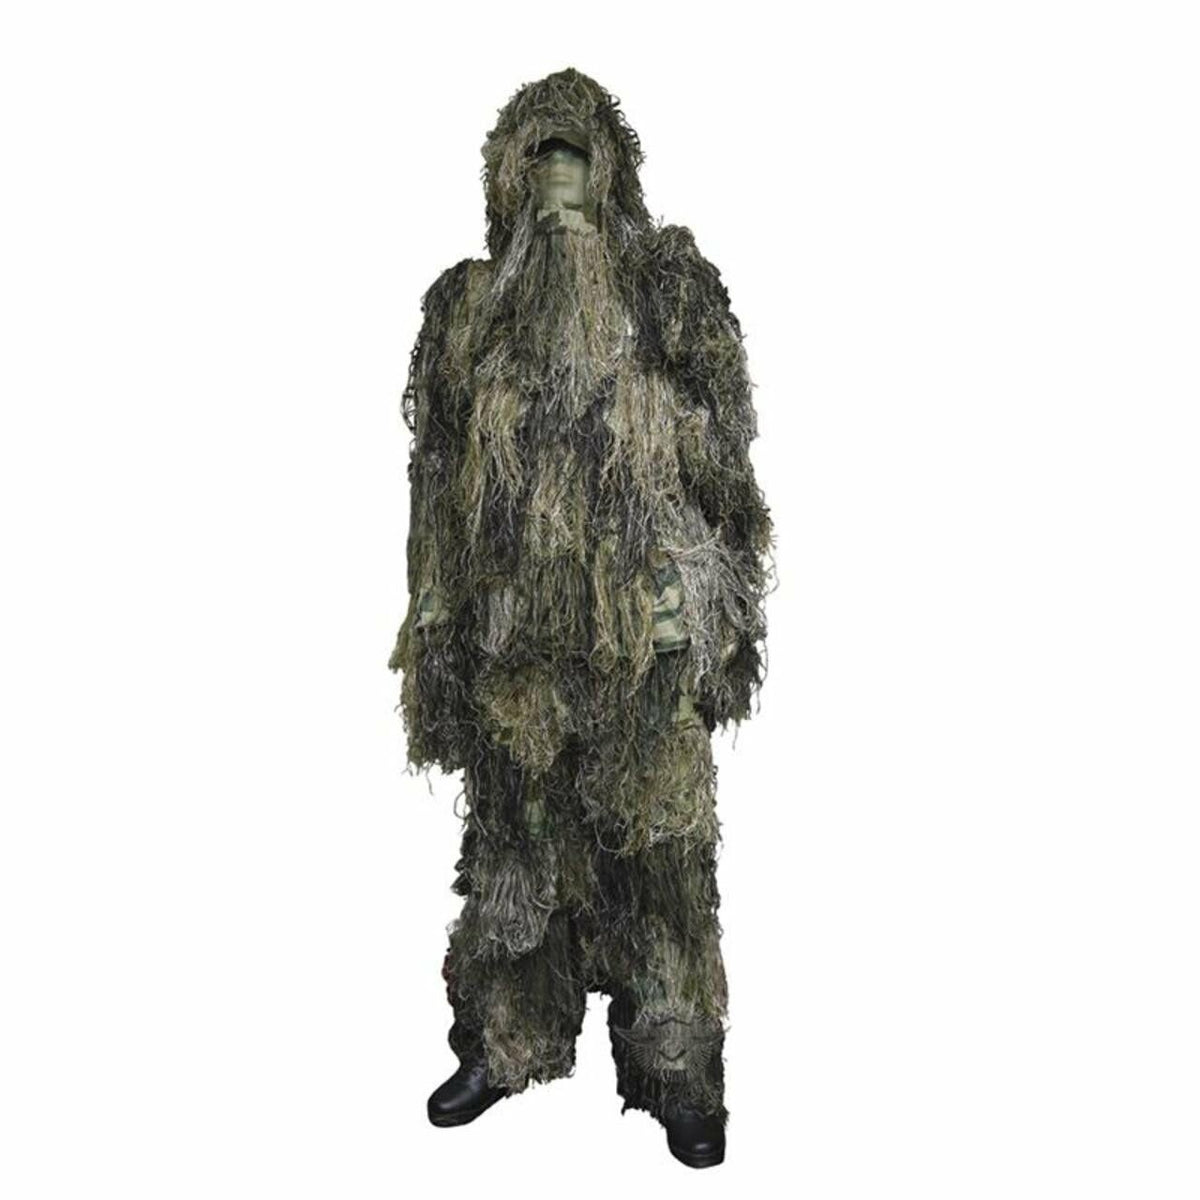 5ive Star Gear KIDS Camouflage Ghillie Suit - WOODLAND CAMO